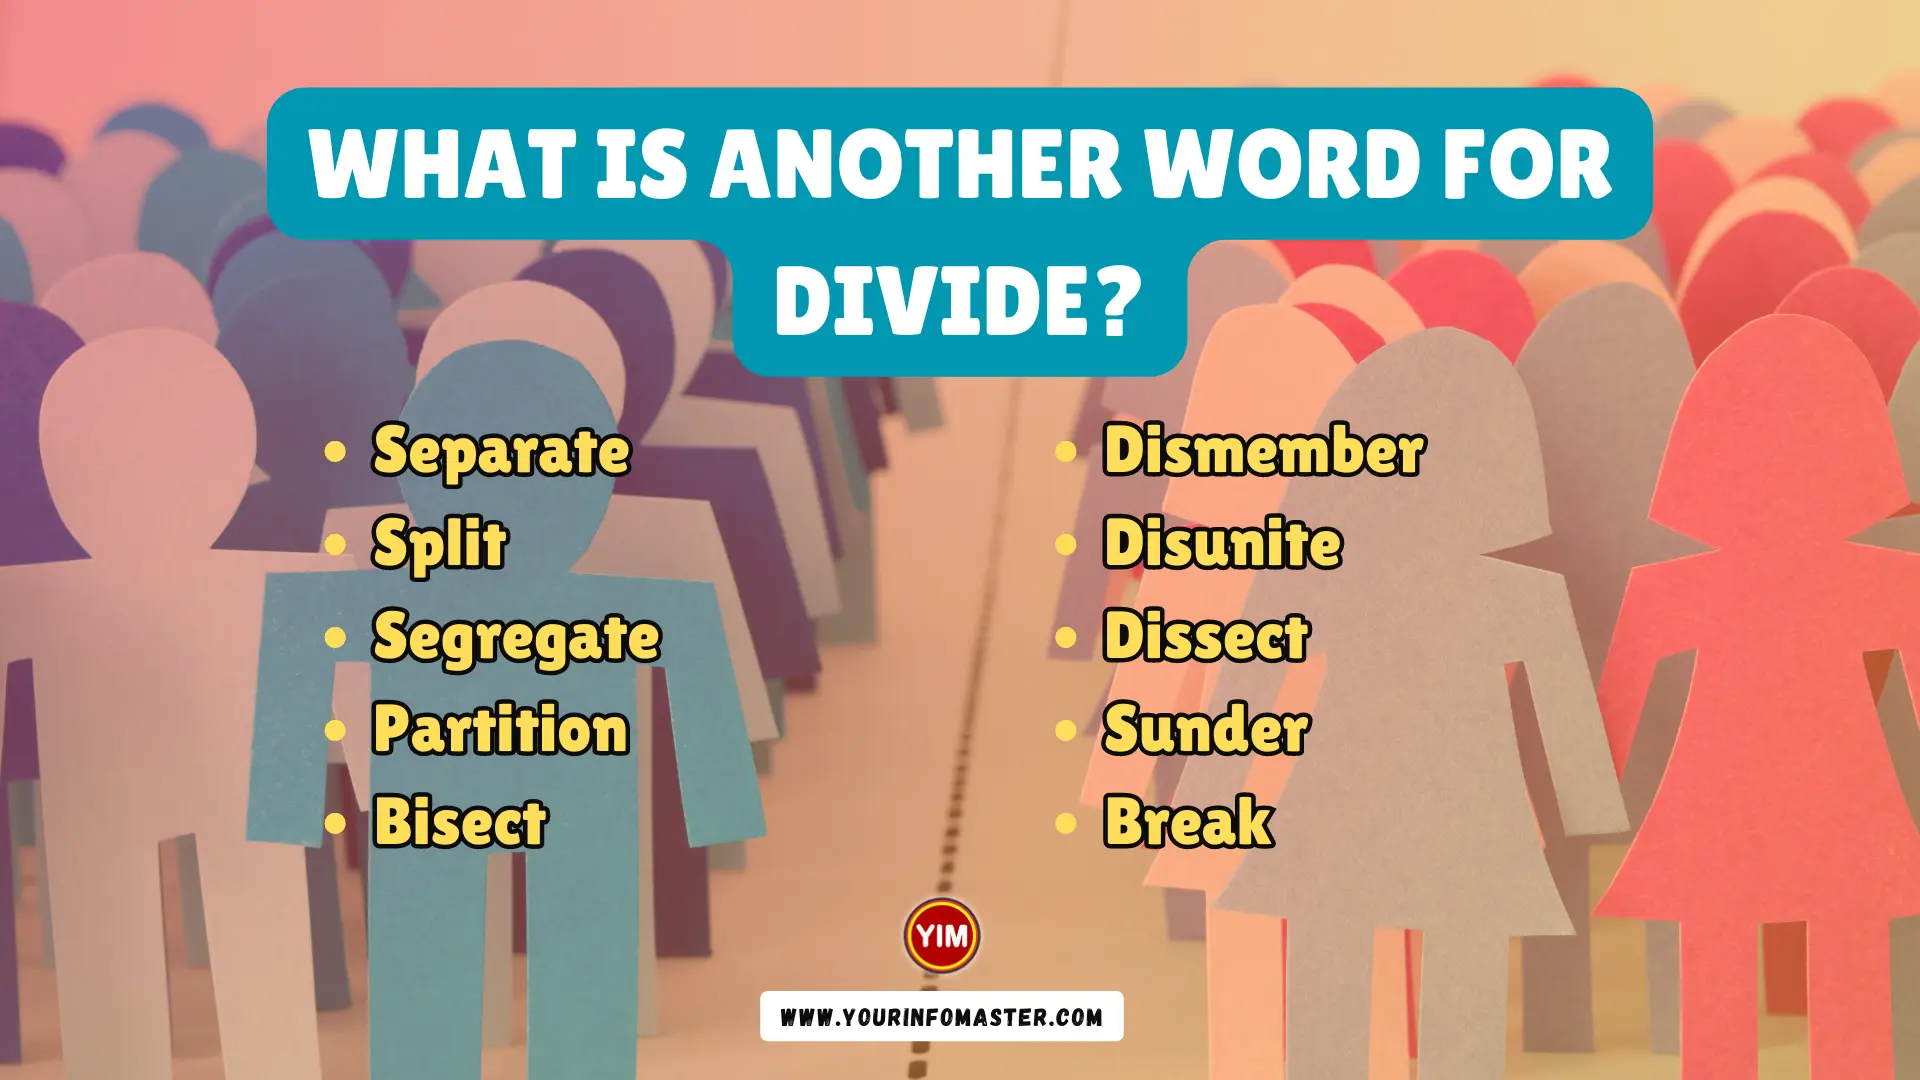 What is another word for Divide